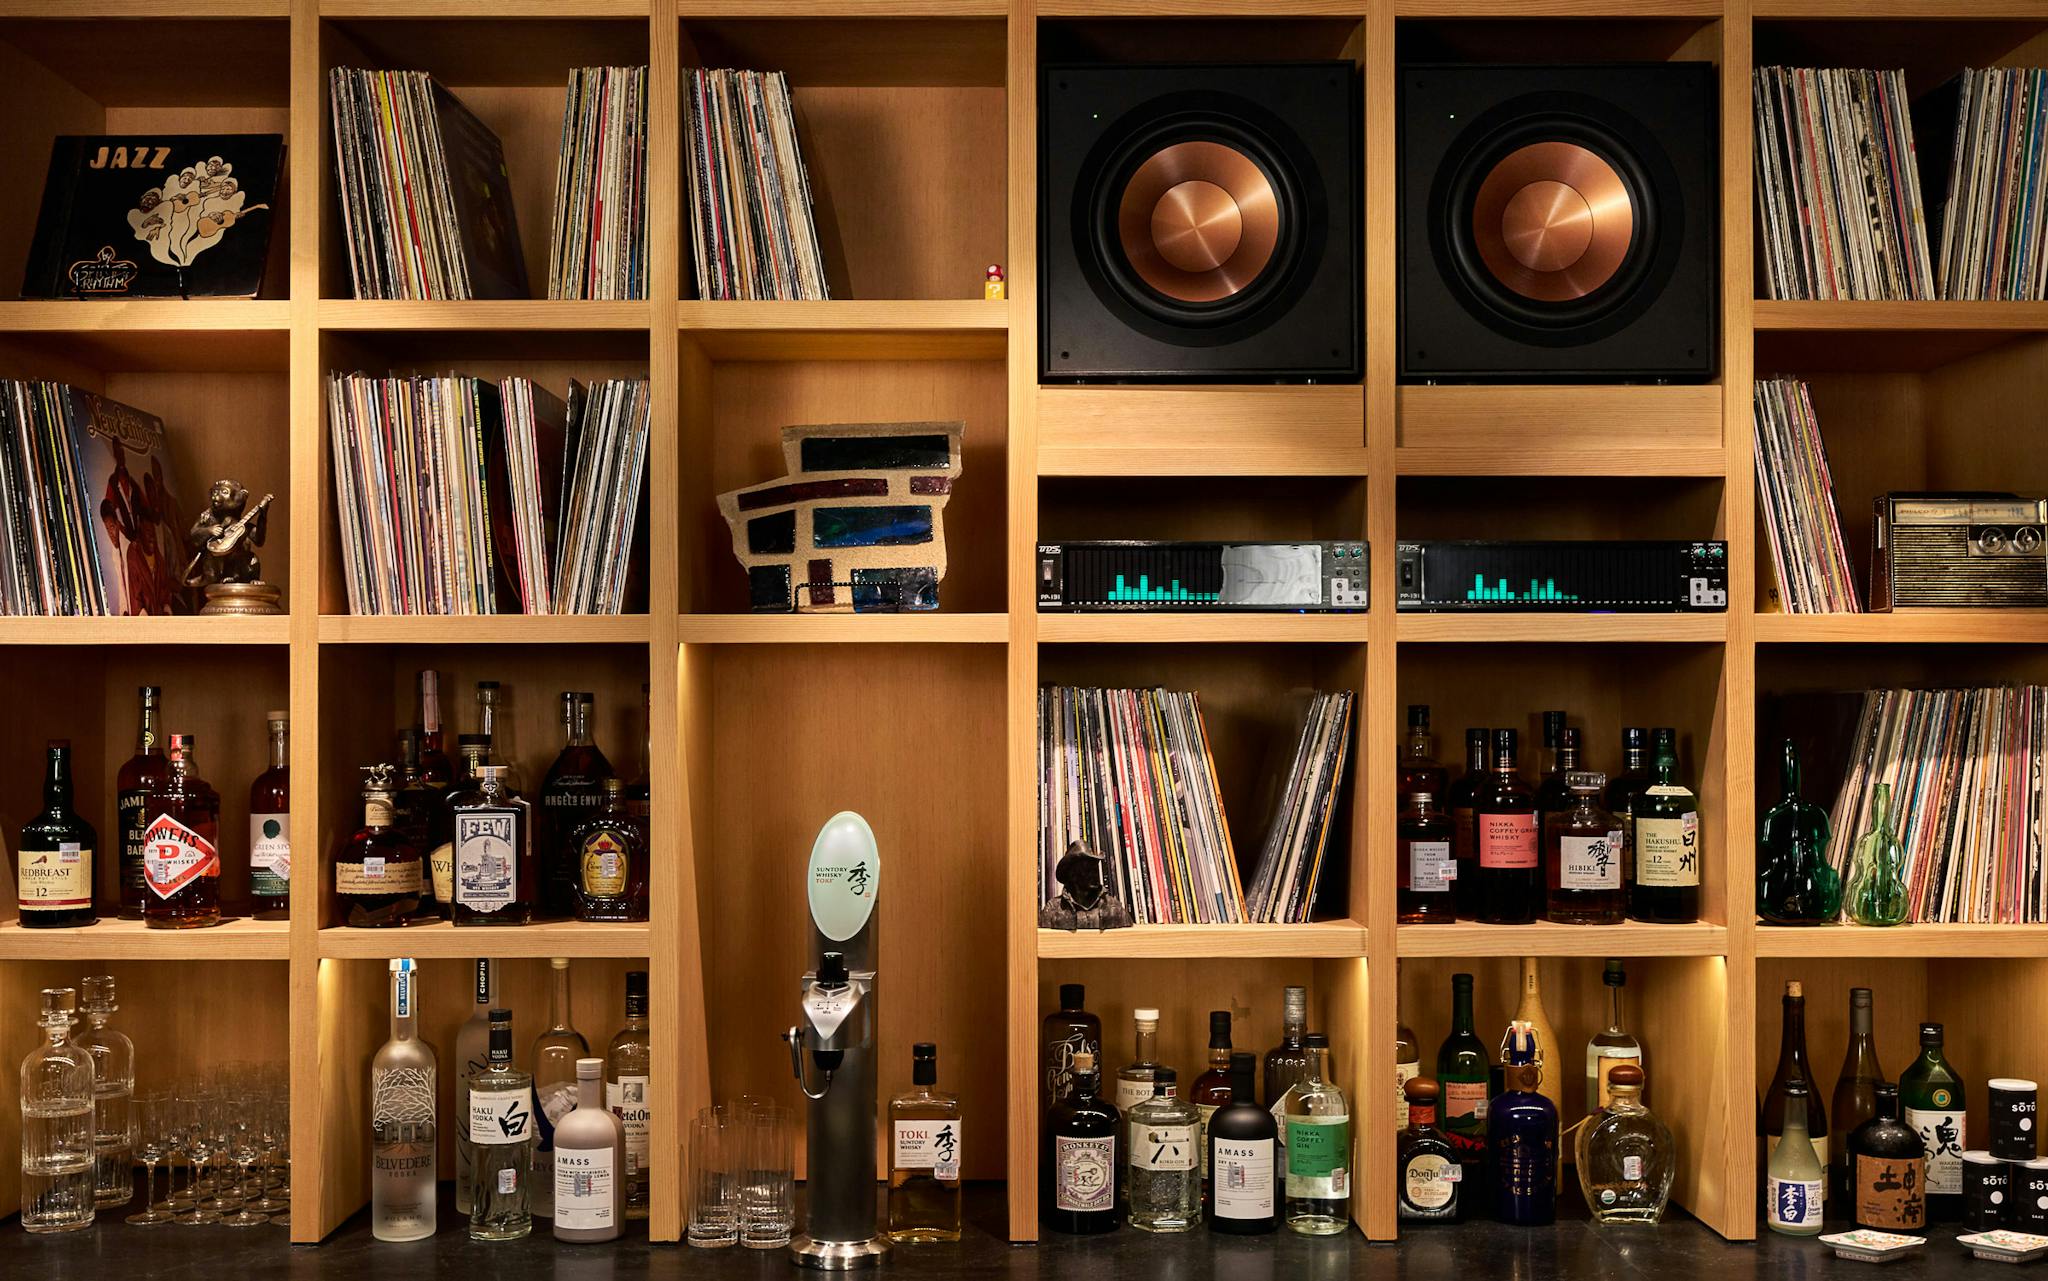 First Look at Equipment Room, a Vinyl Bar Inside the Hotel Magdalena